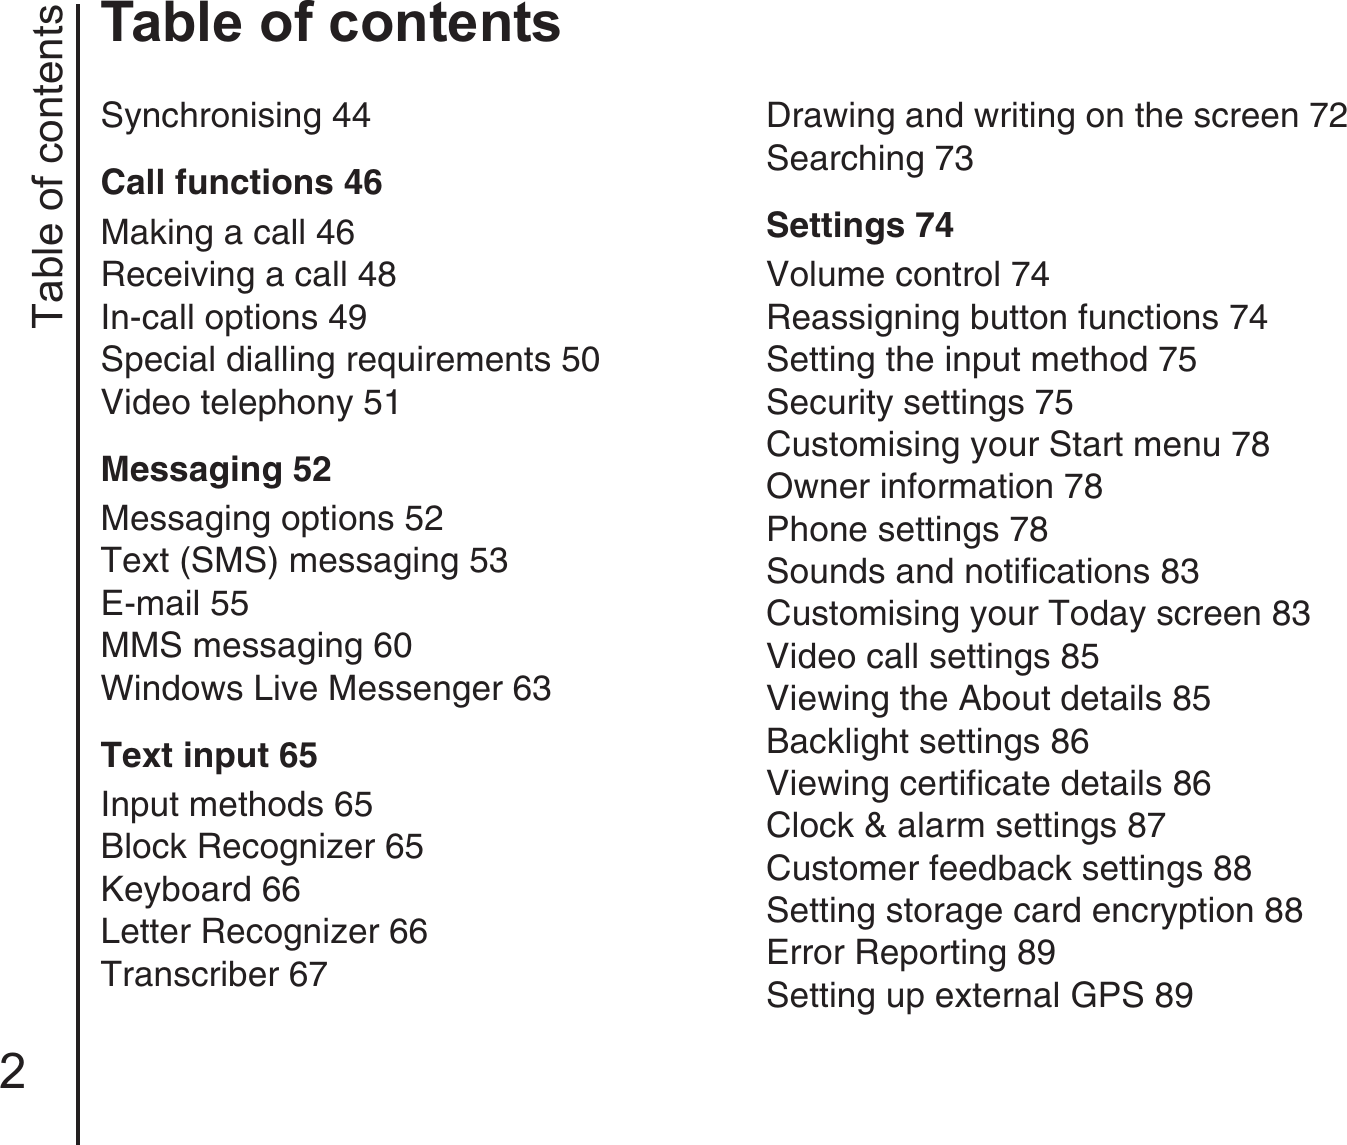 Table of contents2Table of contentsSynchronising 44Call functions 46Making a call 46Receiving a call 48In-call options 49Special dialling requirements 50Video telephony 51Messaging 52Messaging options 52Text (SMS) messaging 53E-mail 55MMS messaging 60Windows Live Messenger 63Text input 65Input methods 65Block Recognizer 65Keyboard 66Letter Recognizer 66Transcriber 67Drawing and writing on the screen 72Searching 73Settings 74Volume control 74Reassigning button functions 74Setting the input method 75Security settings 75Customising your Start menu 78Owner information 78Phone settings 78Sounds and notifications 83Customising your Today screen 83Video call settings 85Viewing the About details 85Backlight settings 86Viewing certificate details 86Clock &amp; alarm settings 87Customer feedback settings 88Setting storage card encryption 88Error Reporting 89Setting up external GPS 89